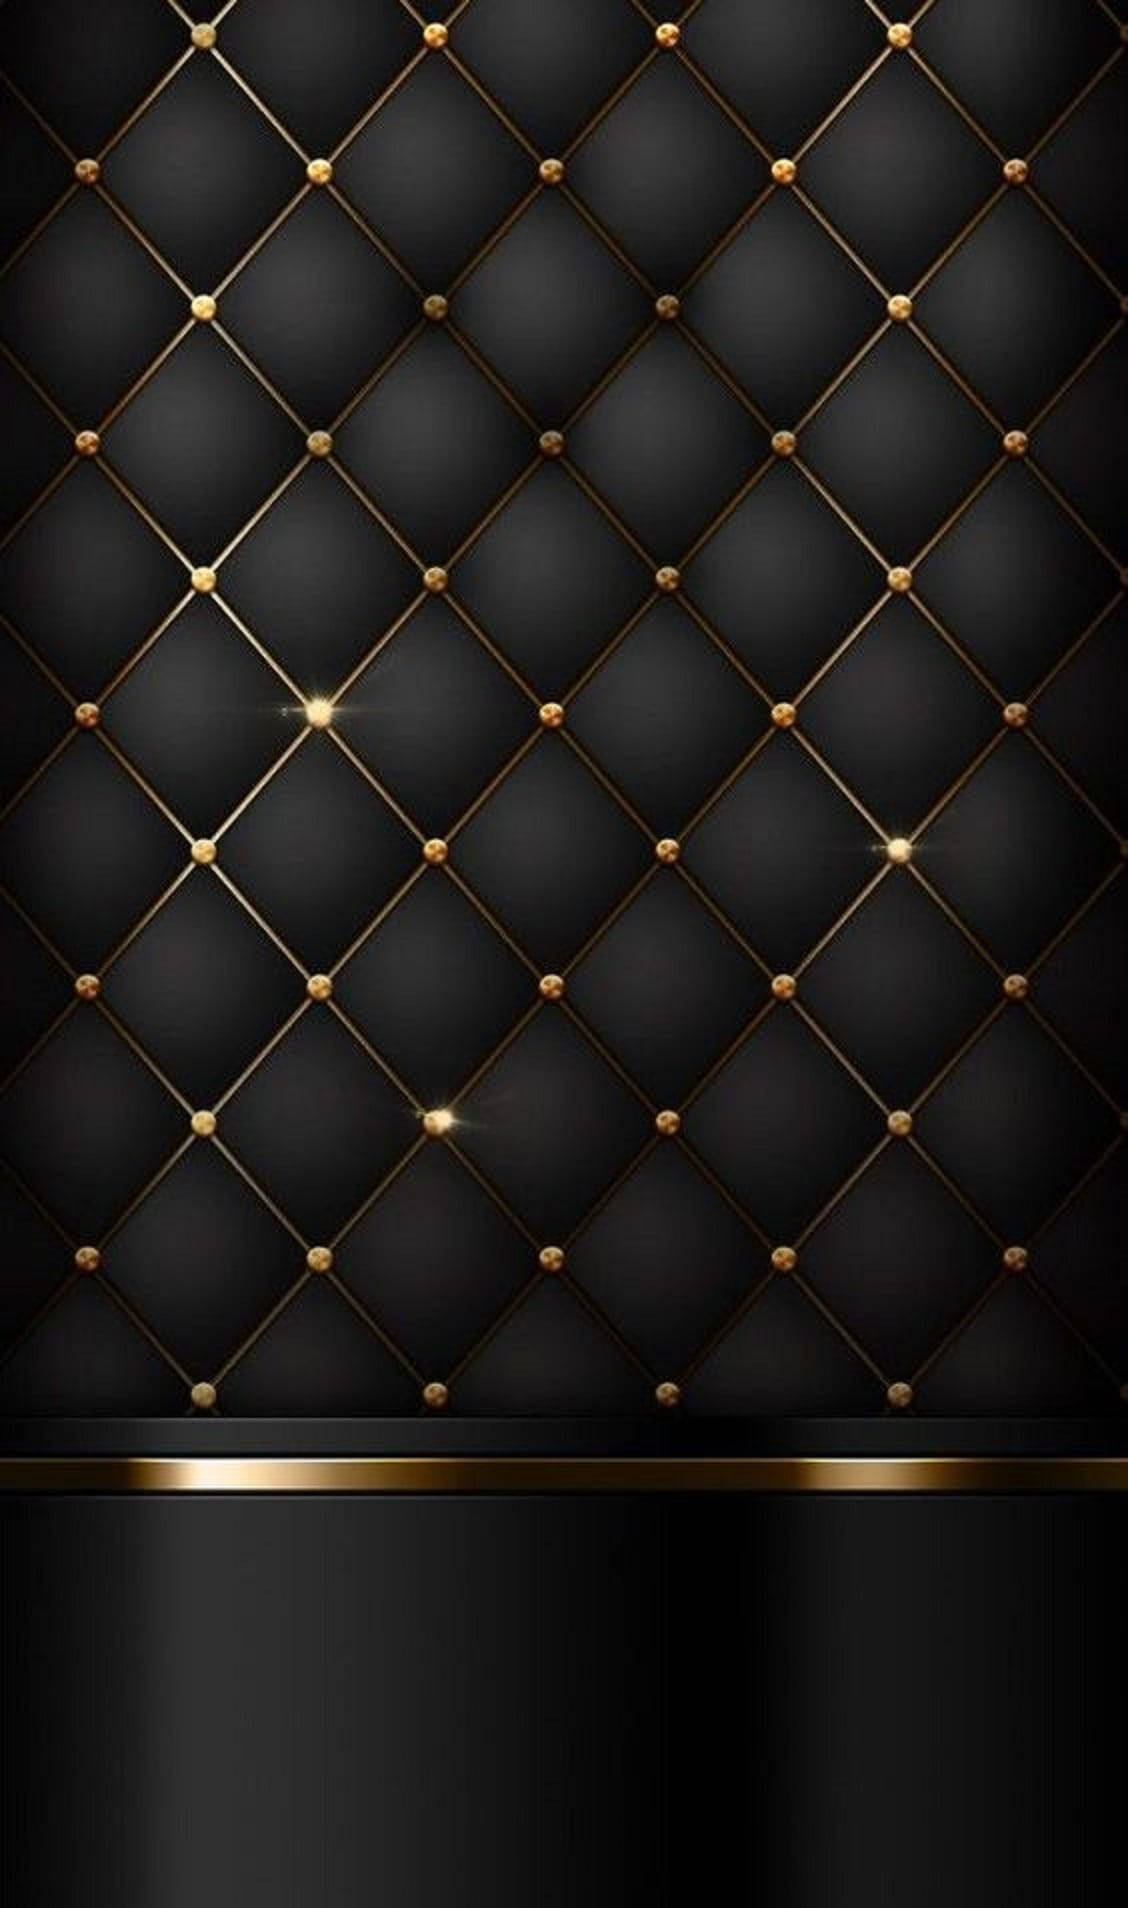 Tufted Metallic Gold And Black Pattern Background